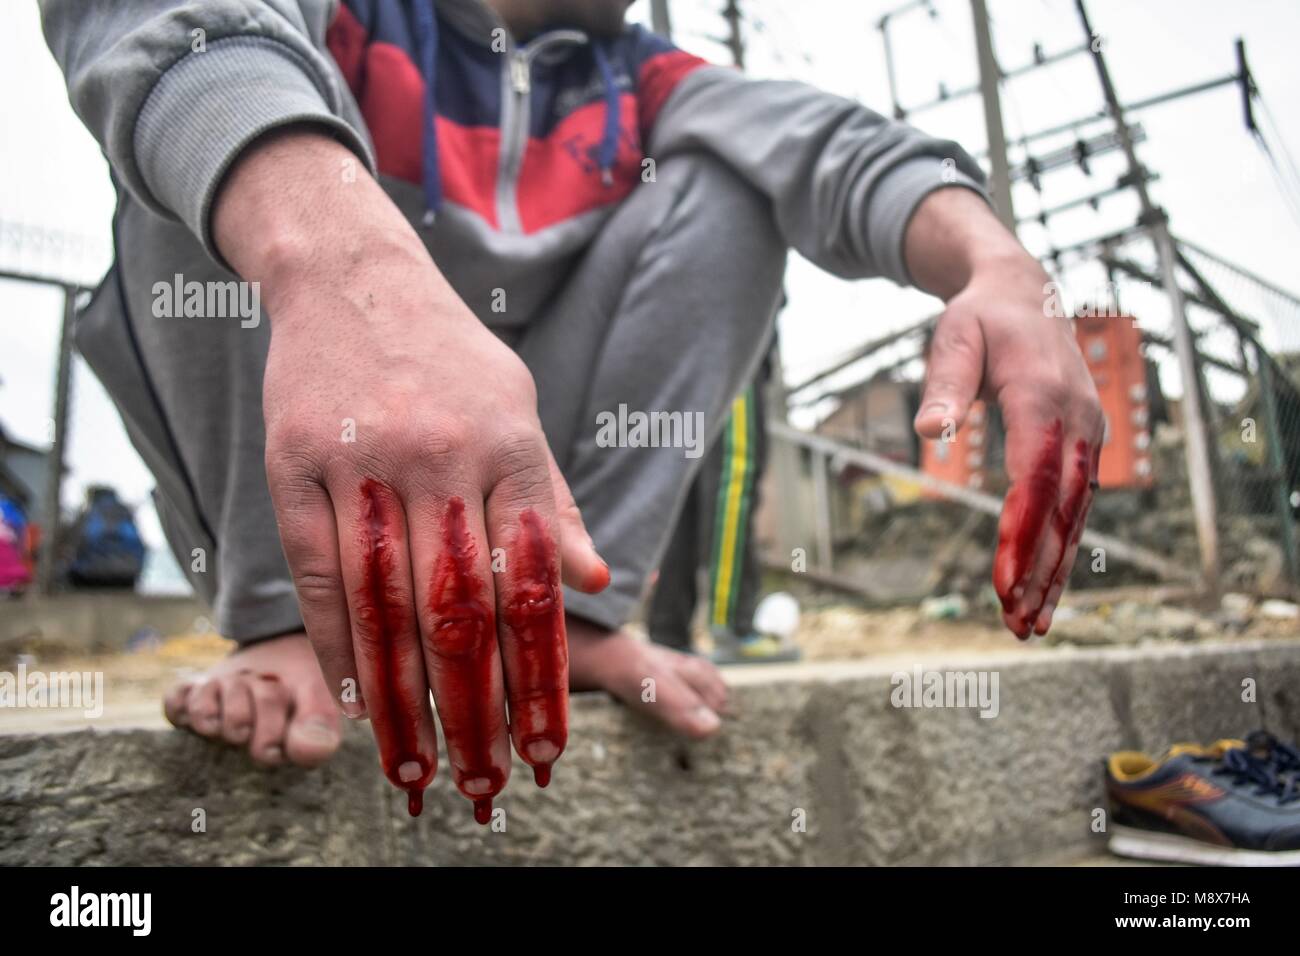 March 21, 2018 - Srinagar, J&K, India - A Kashmiri man bleeds after a traditional health worker used leeches to suck out blood as part of a treatment in Srinagar. Every year traditional health workers in Indian administered Kashmir use leeches to treat people for small, itchy, painful lumps that develop on the skin called chilblains, acquired during winter on Nowruz, which marks the first day of spring and the beginning of the year in the Persian calendar. Credit: Saqib Majeed/SOPA Images/ZUMA Wire/Alamy Live News Stock Photo